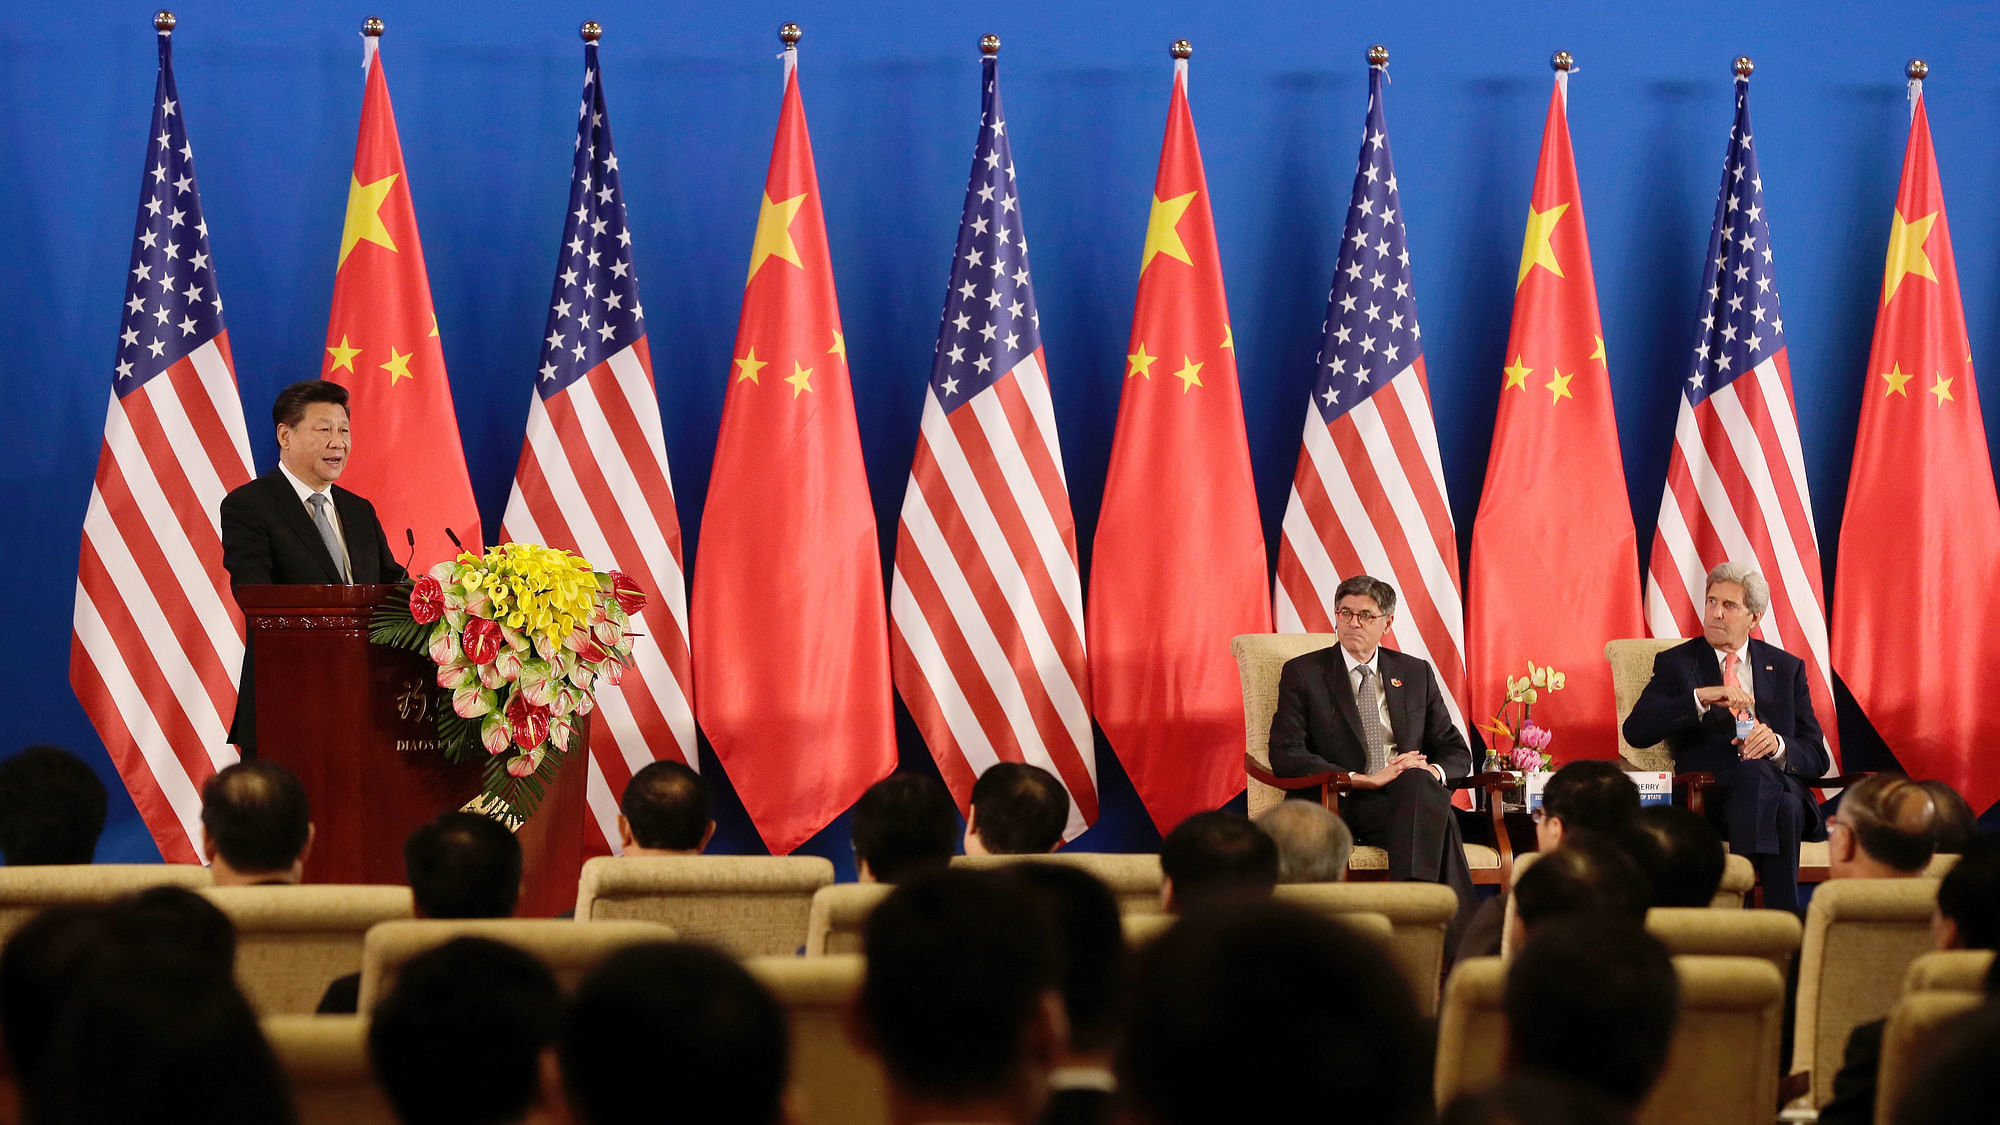 China’s President Xi Jinping speaks from the stage with US Secretary of State John Kerry (R) and US Treasury Secretary Jacob Lew. (Photo: AP)